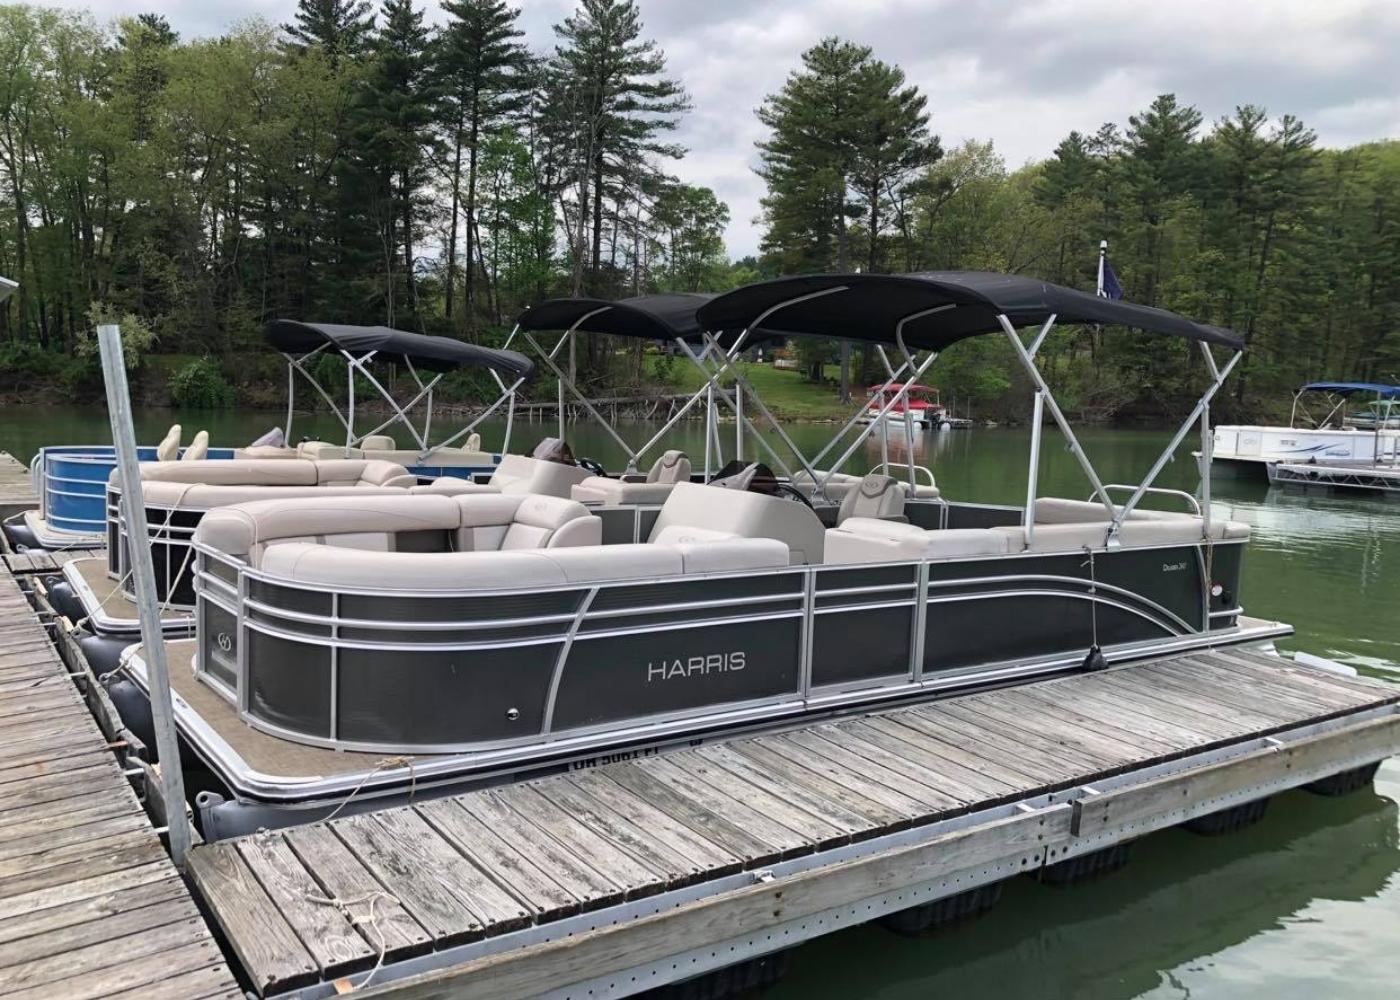 https://www.atwoodlakeboats.com/wp-content/uploads/14.jpg